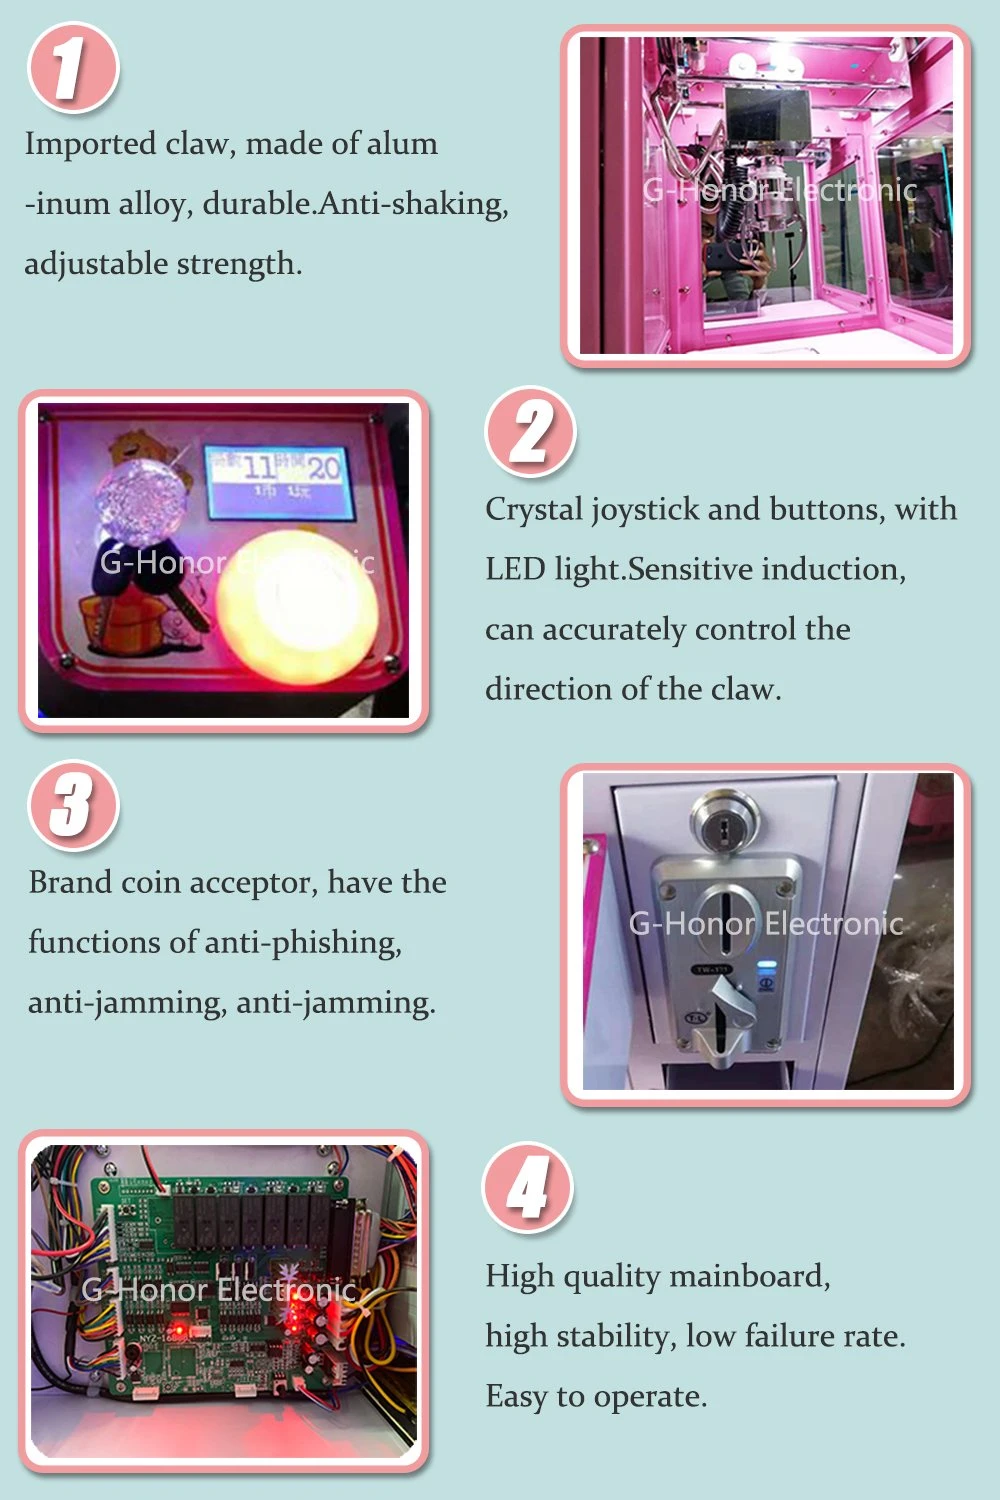 Mini 2 Players Coin Operated Plush Toy Claw Machine Arcade Gift Vending Machine Arcade Game Machine Arcade Claw Crane Machine for Shopping Mall